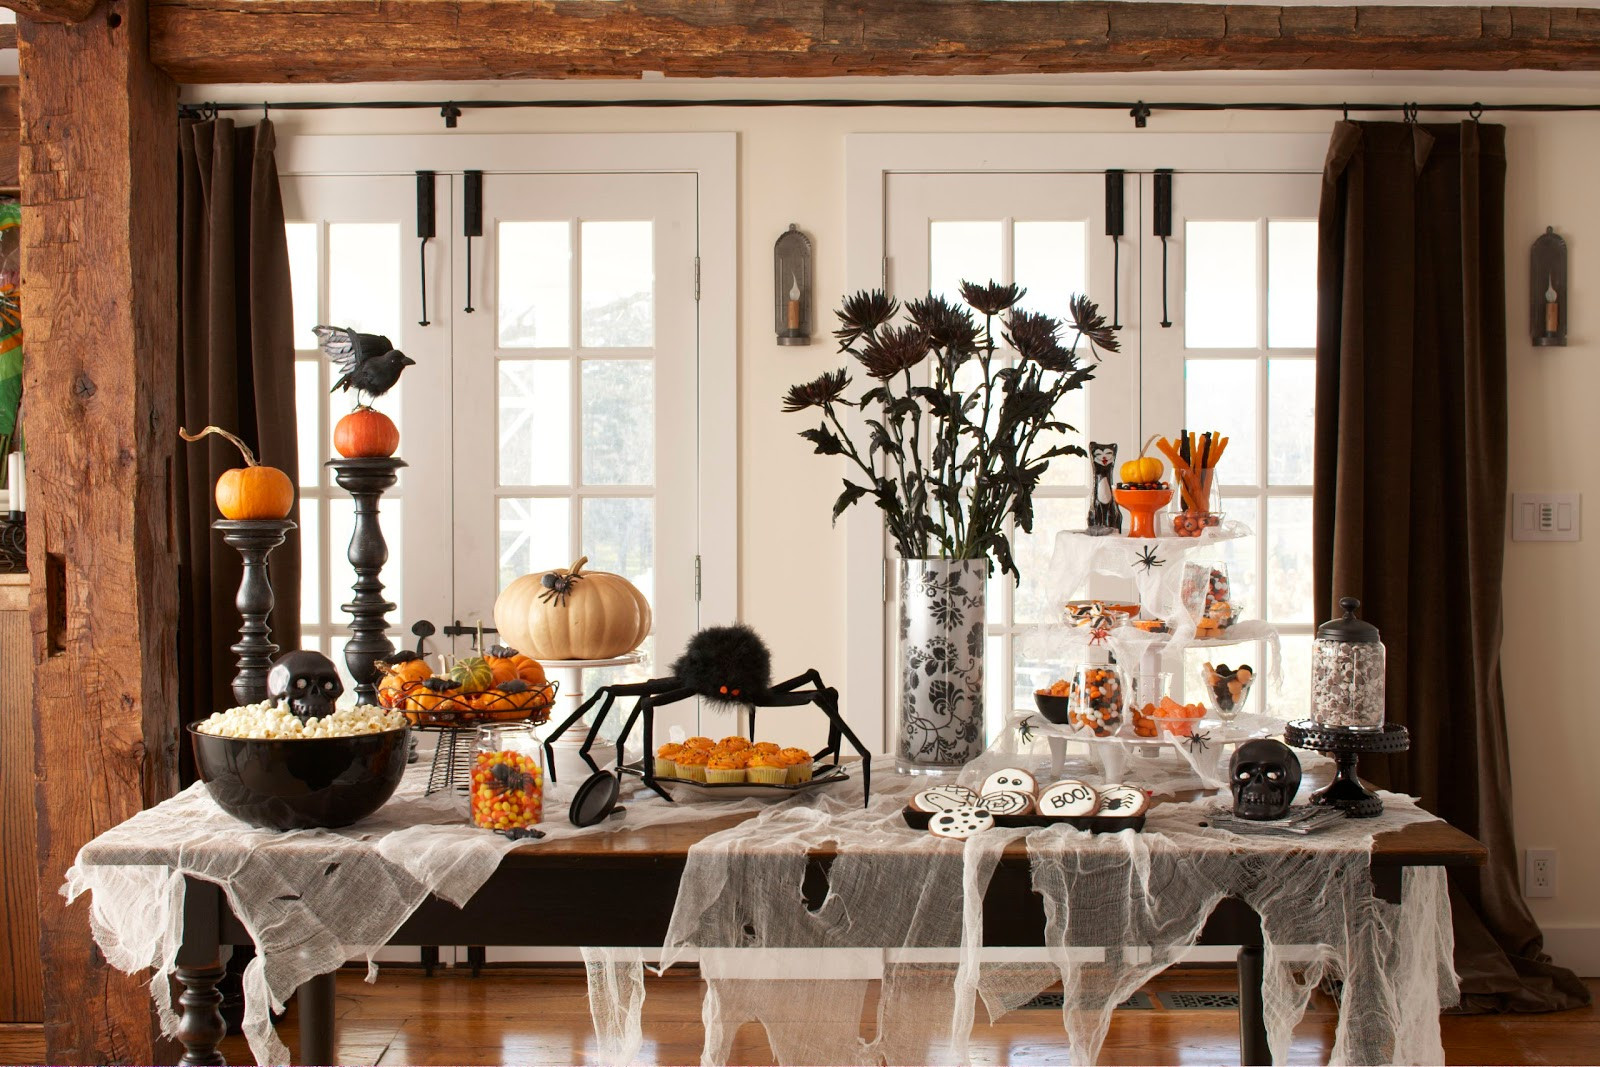 DIY Halloween Party Decor
 Karin Lidbeck Clever Halloween party ideas Easy last